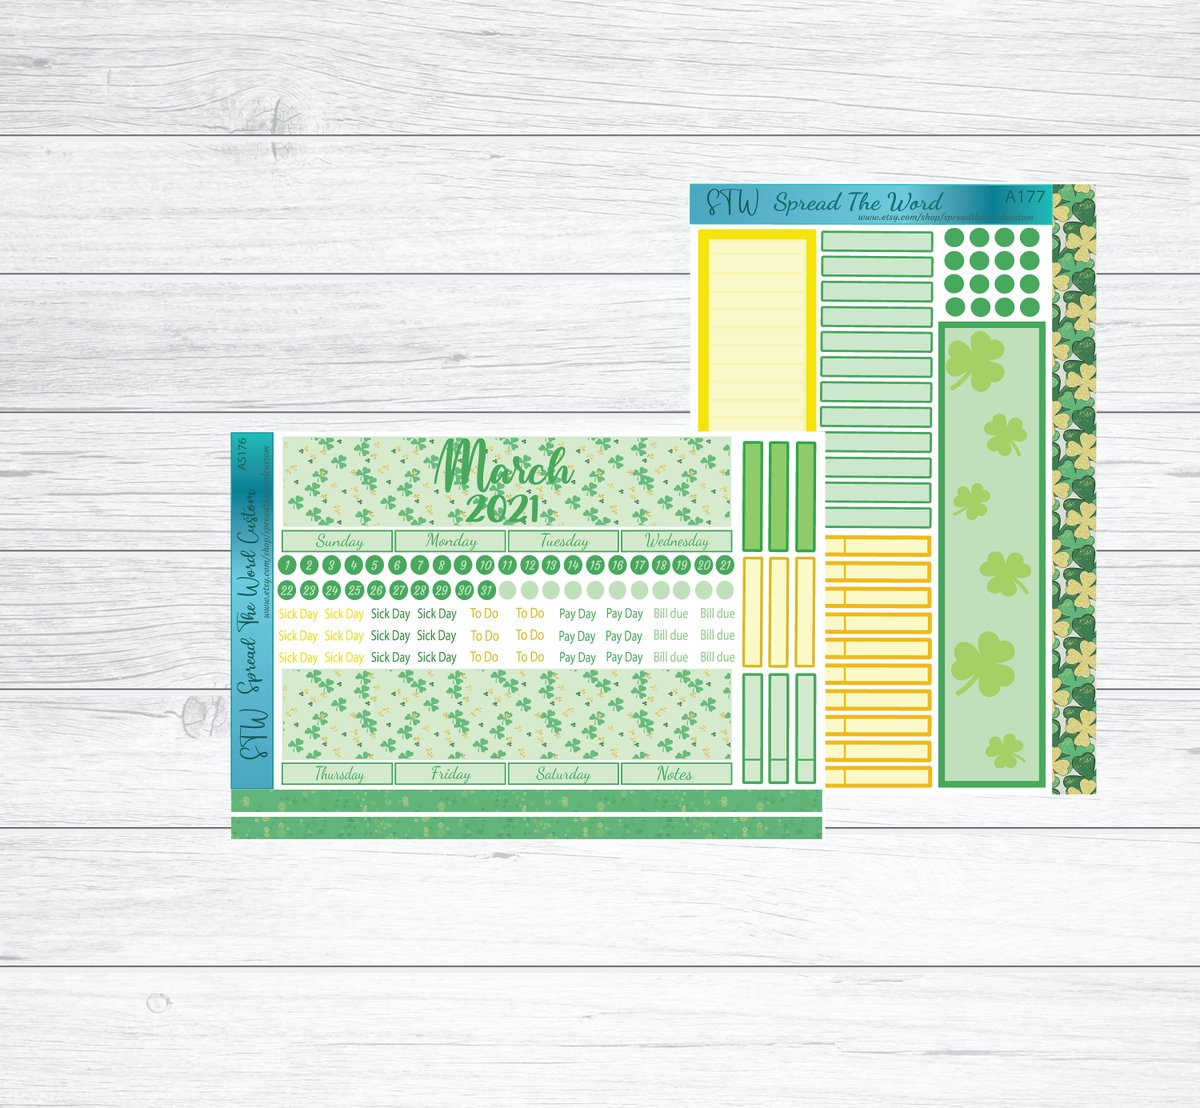 Excited to share the latest addition to my #etsy shop: EC 7x9 Monthly Kit March St Patrick planner kit etsy.me/3aHnjJd #plannerlabels #erincondren #happyplanner #plumplanner #duoplanner #freeshipping #plannerstickers #stickerkits #stickerpacks